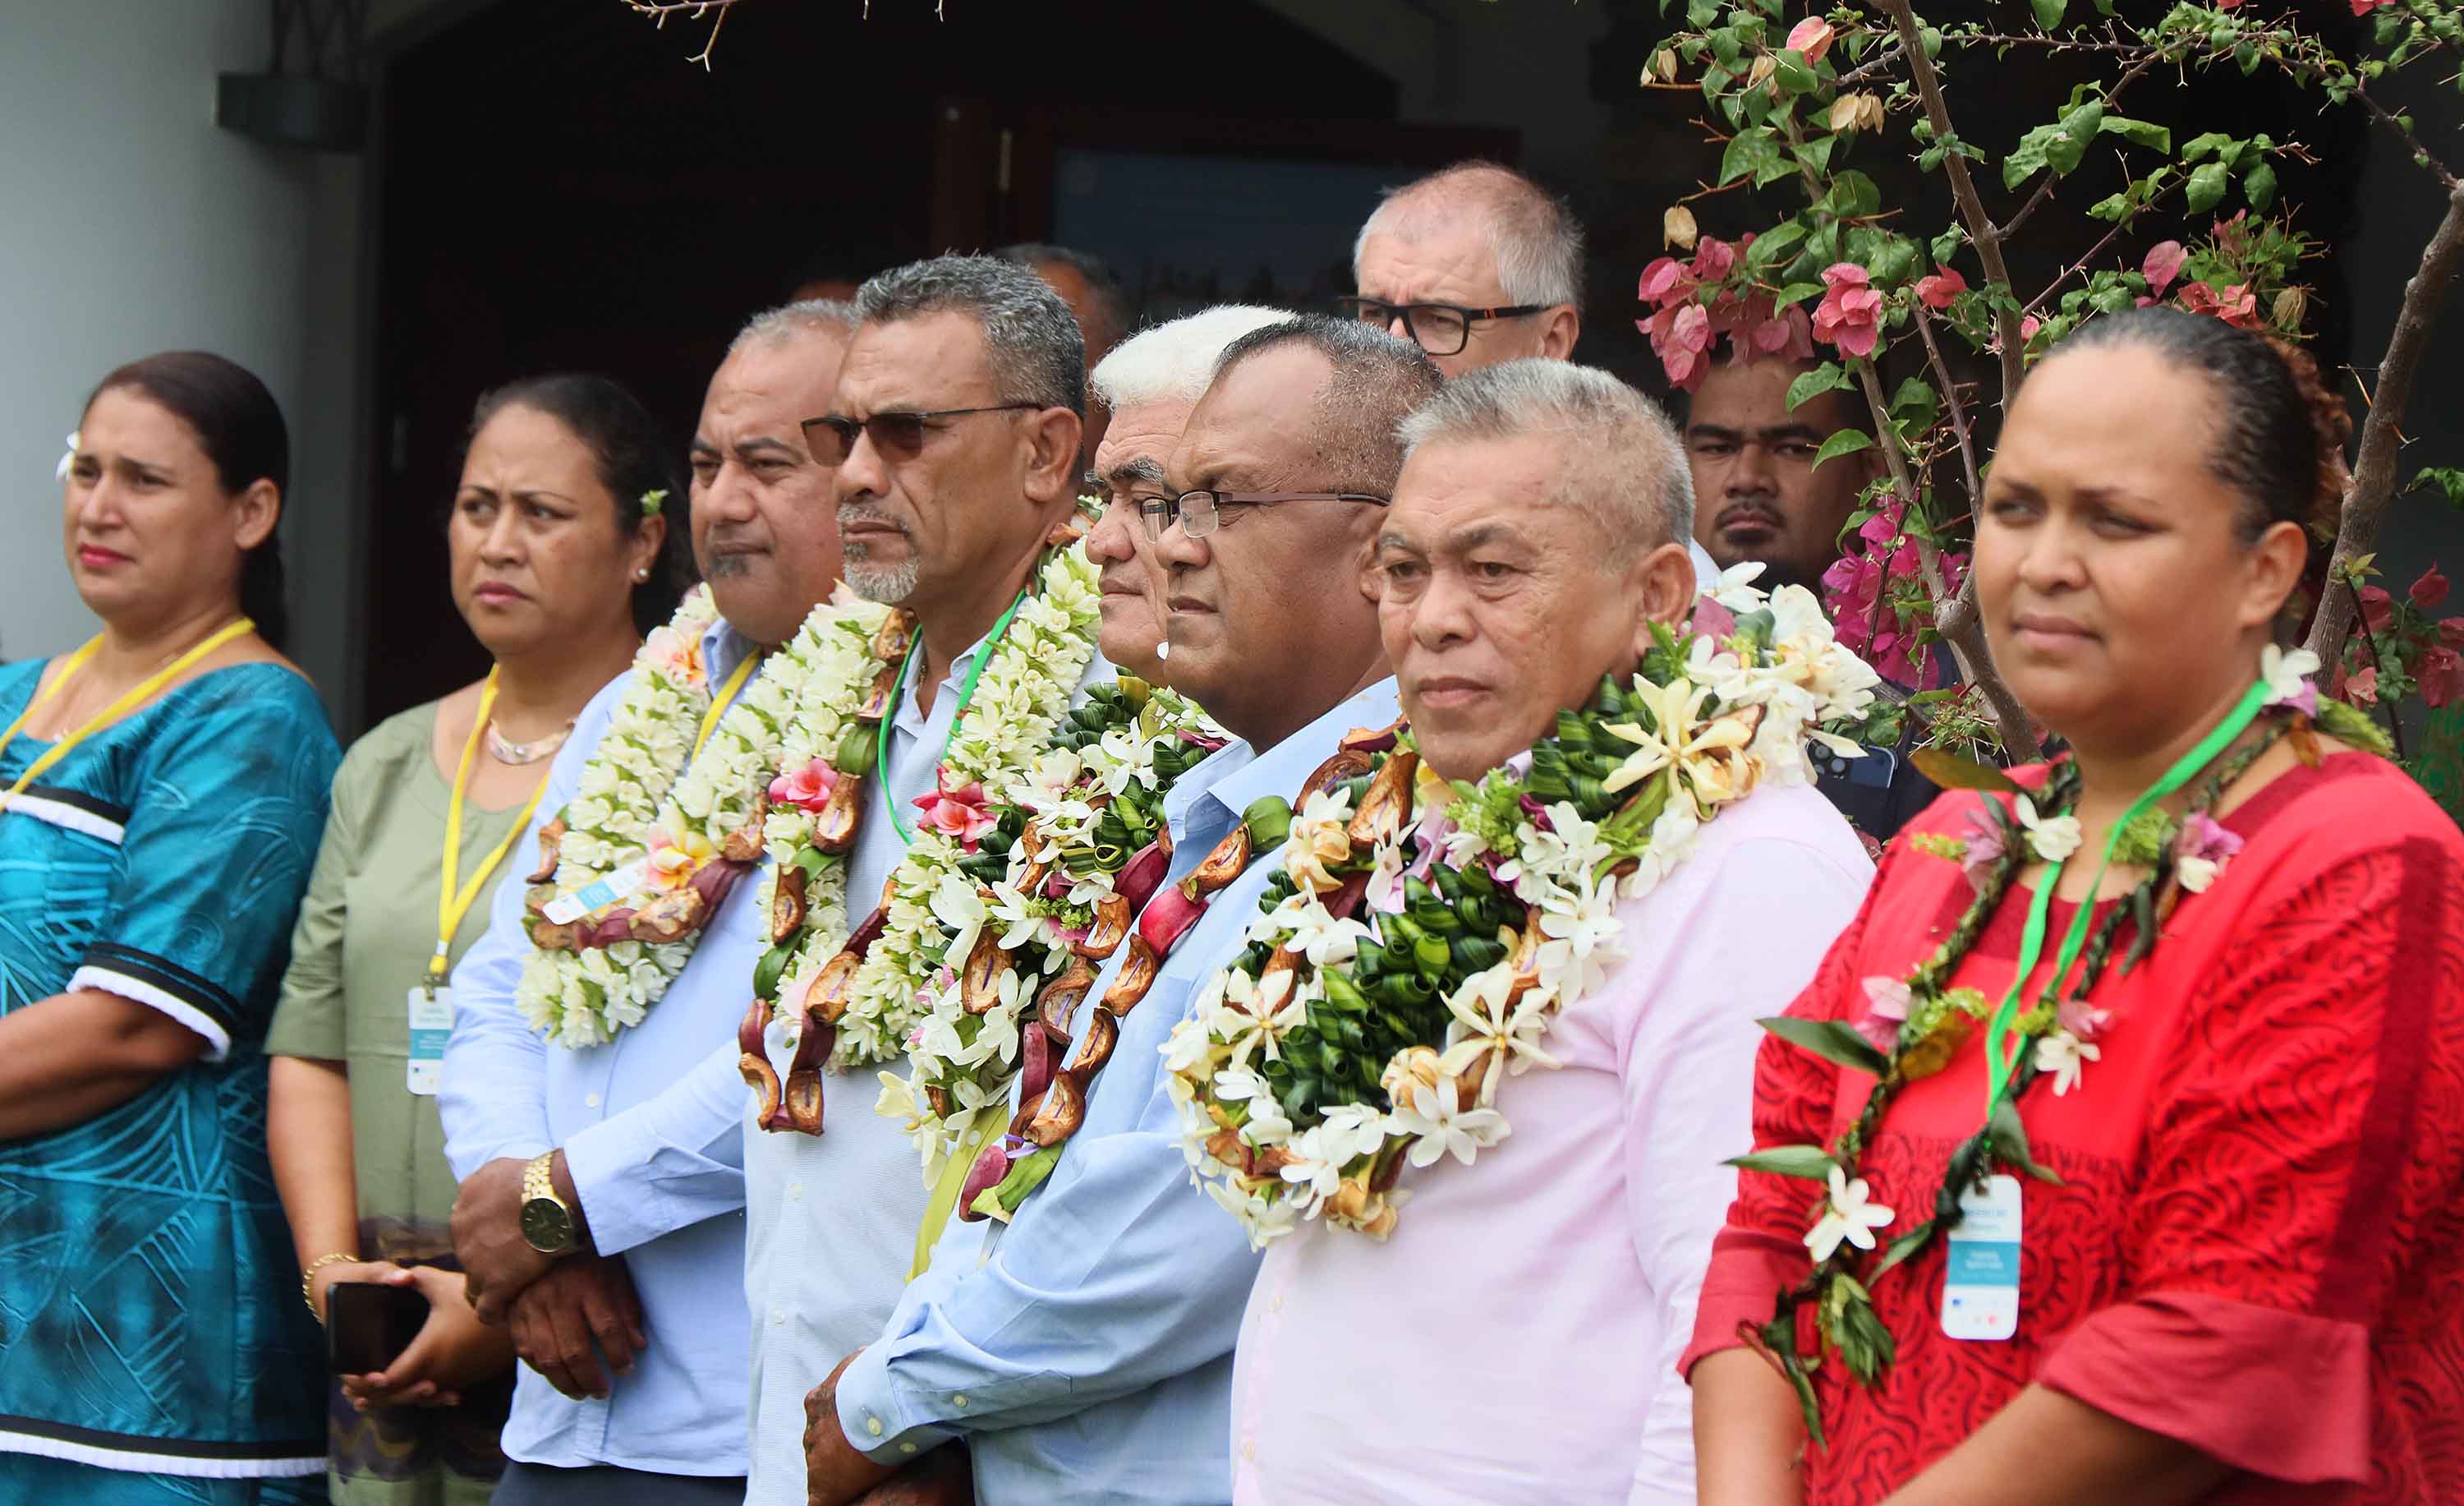 Delegations from Wallis and Futuna